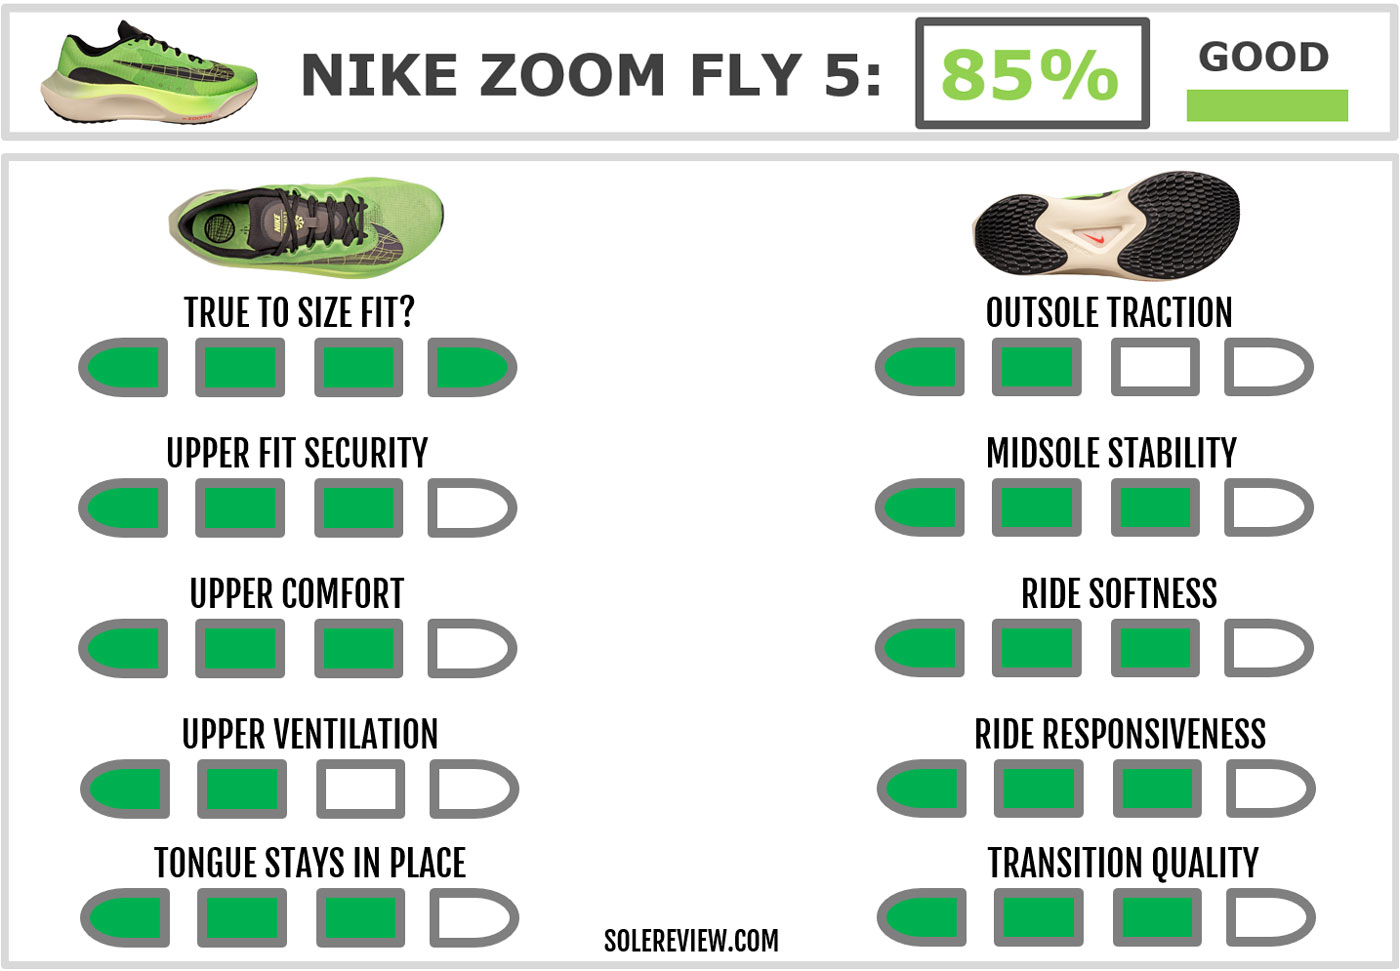 The overall rating of the Nike Zoom Fly 5.